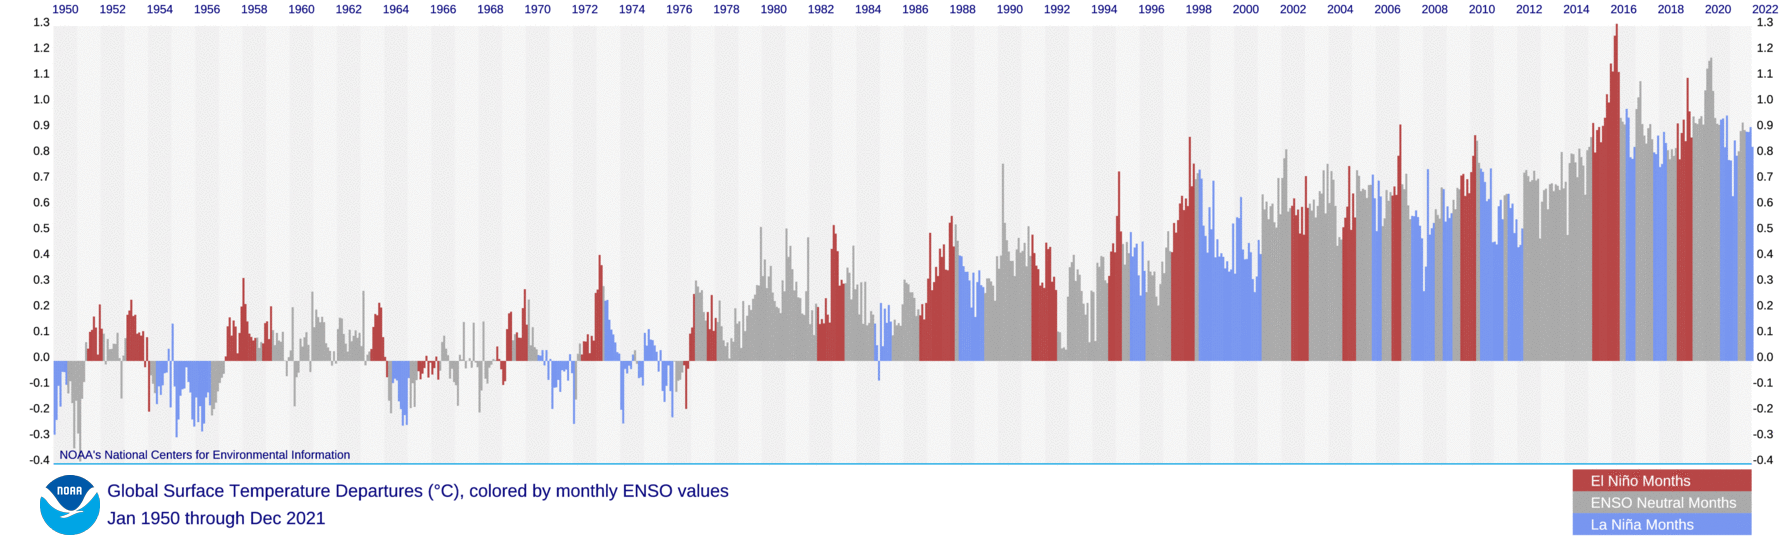 Global monthly temperature anomalies, with ENSO status